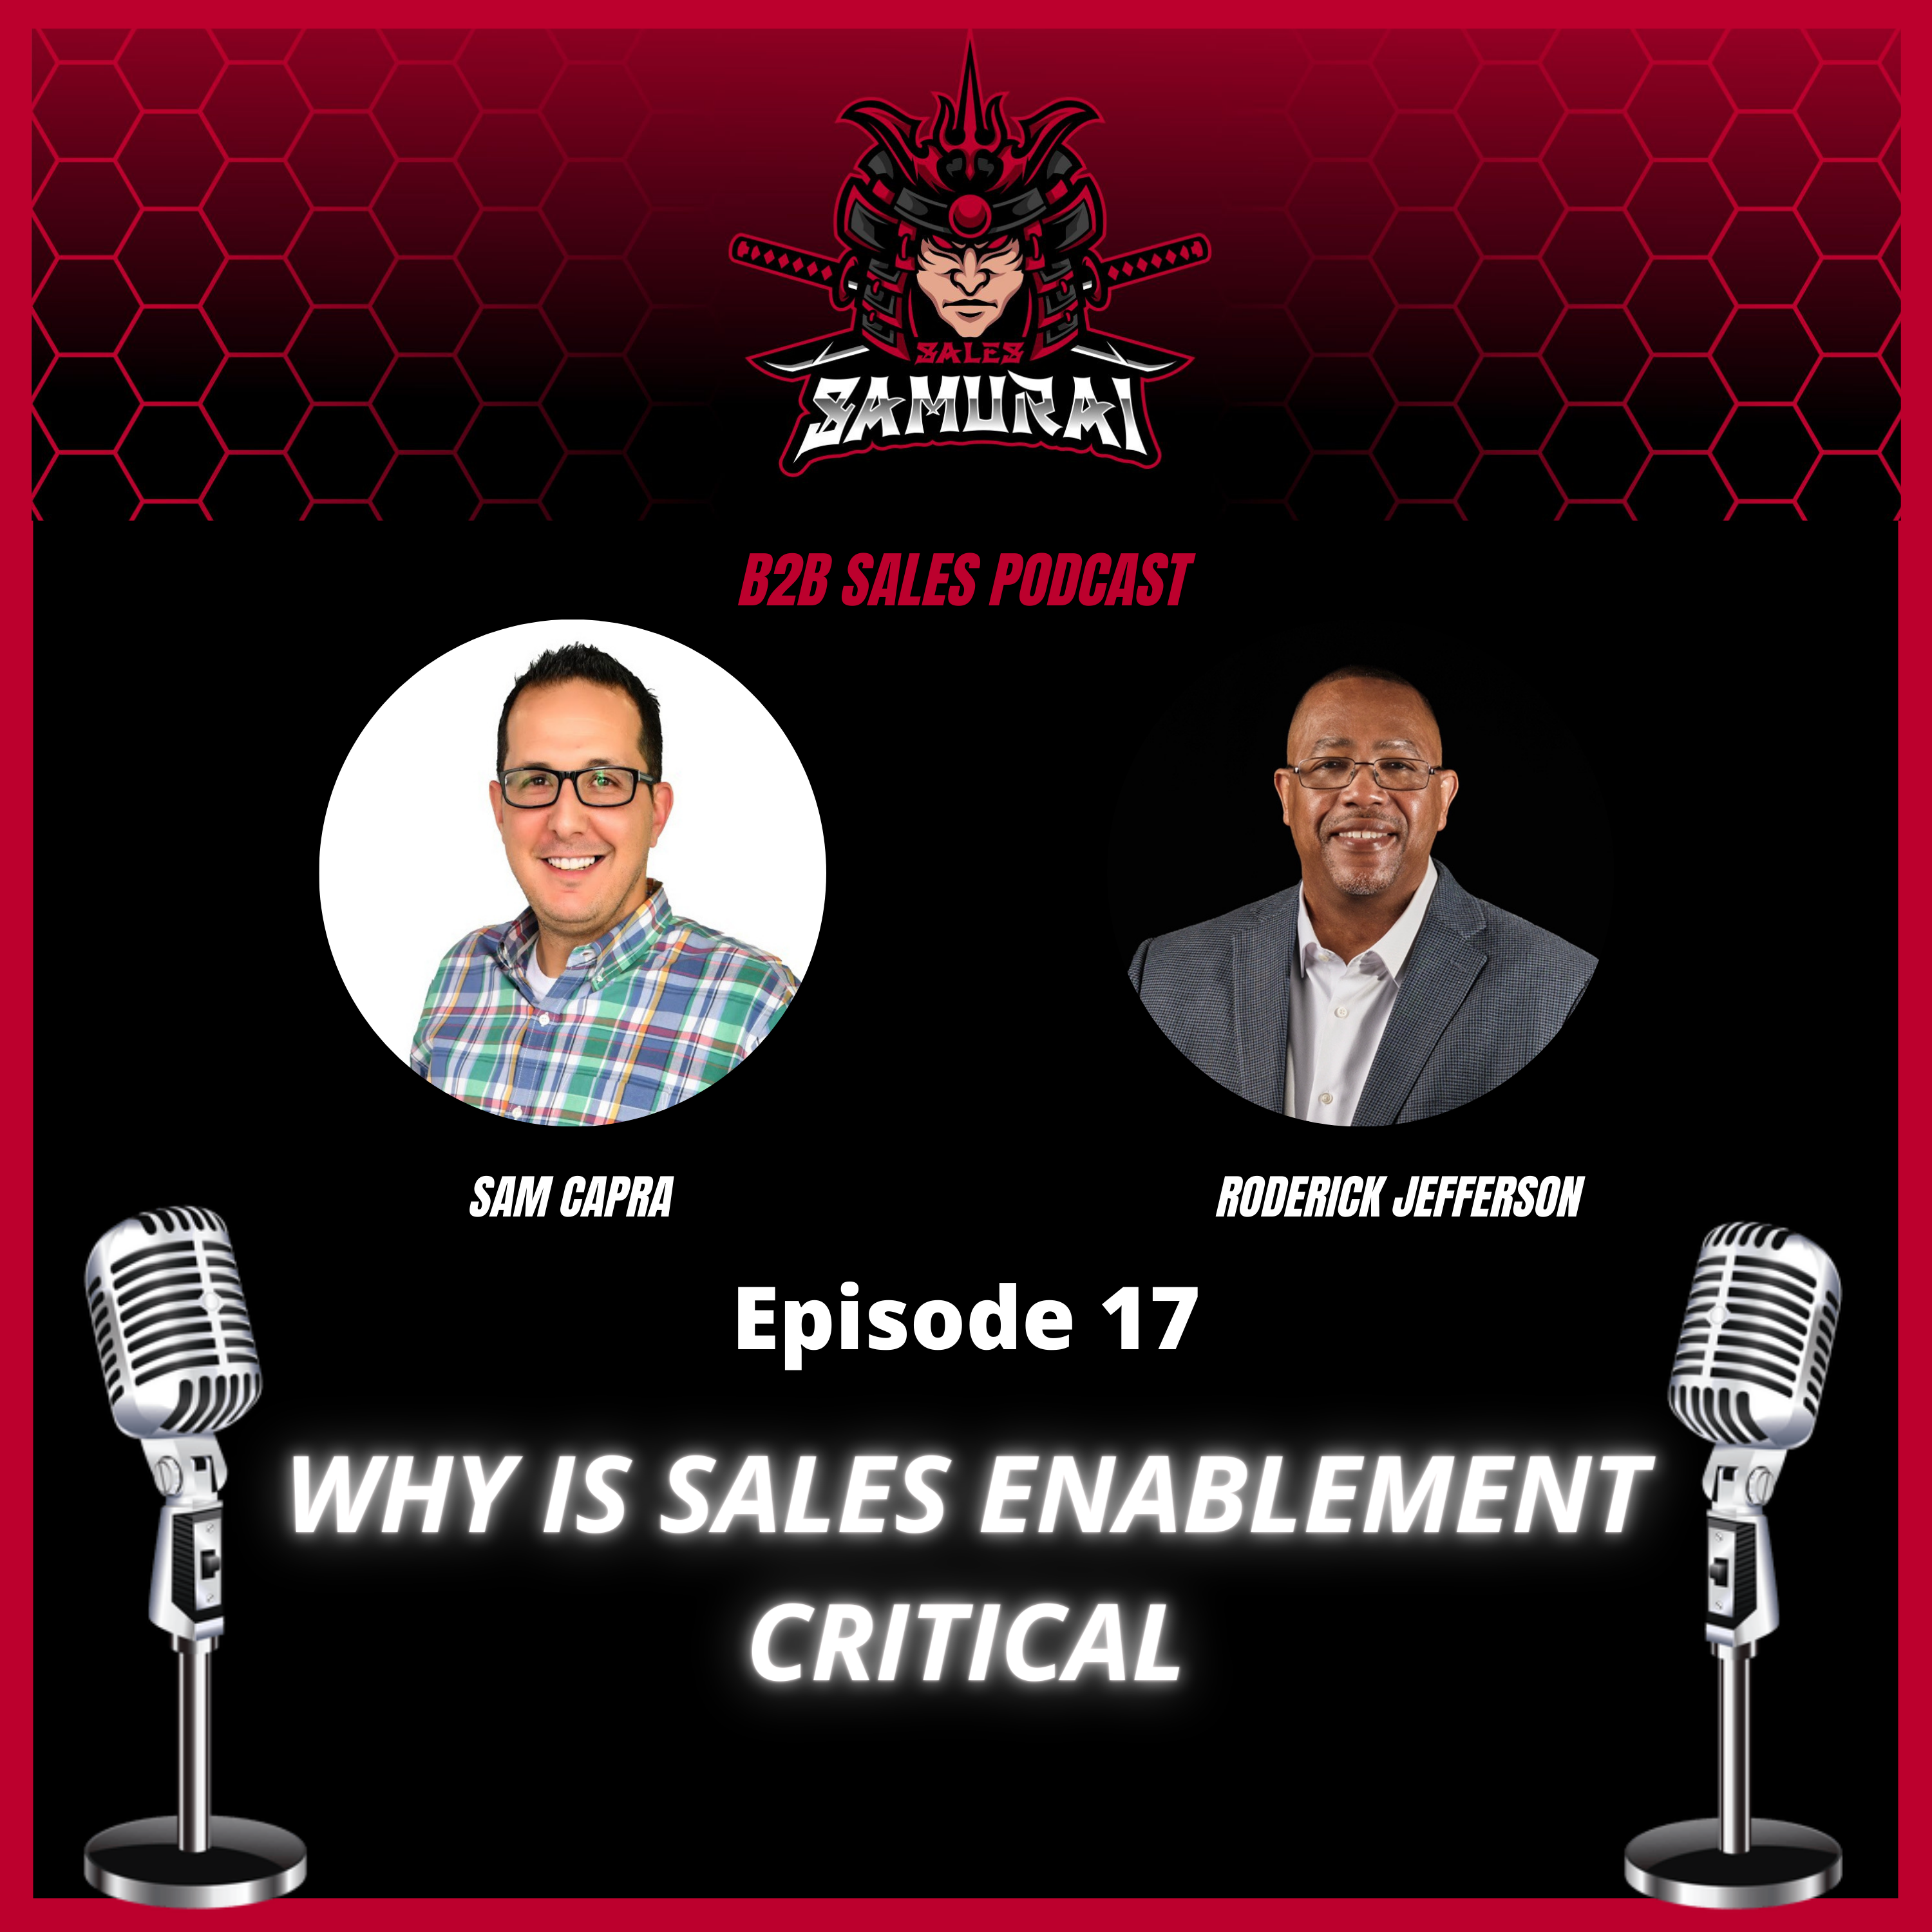 Why is Sales Enablement CRITICAL